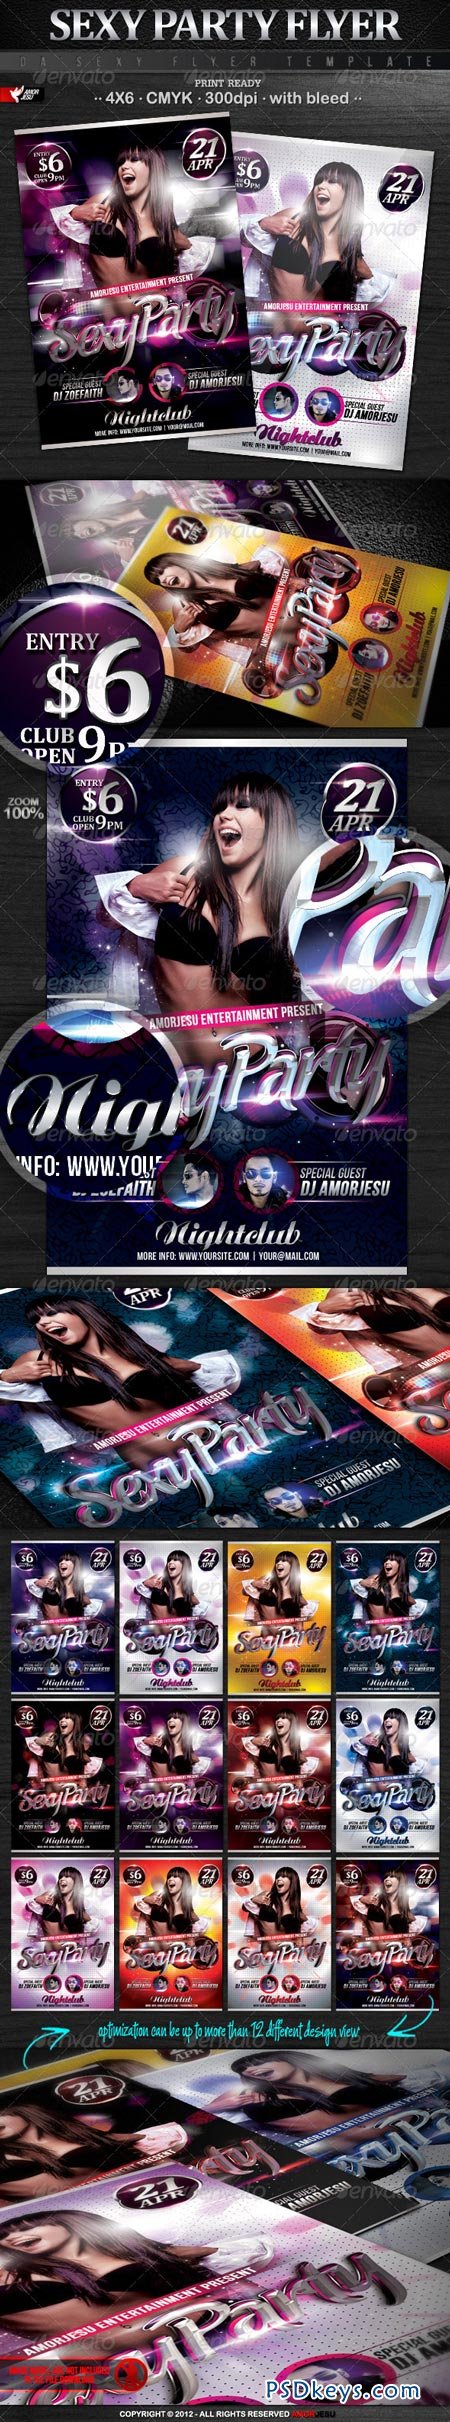 Sexy Party Flyer Template 2213465